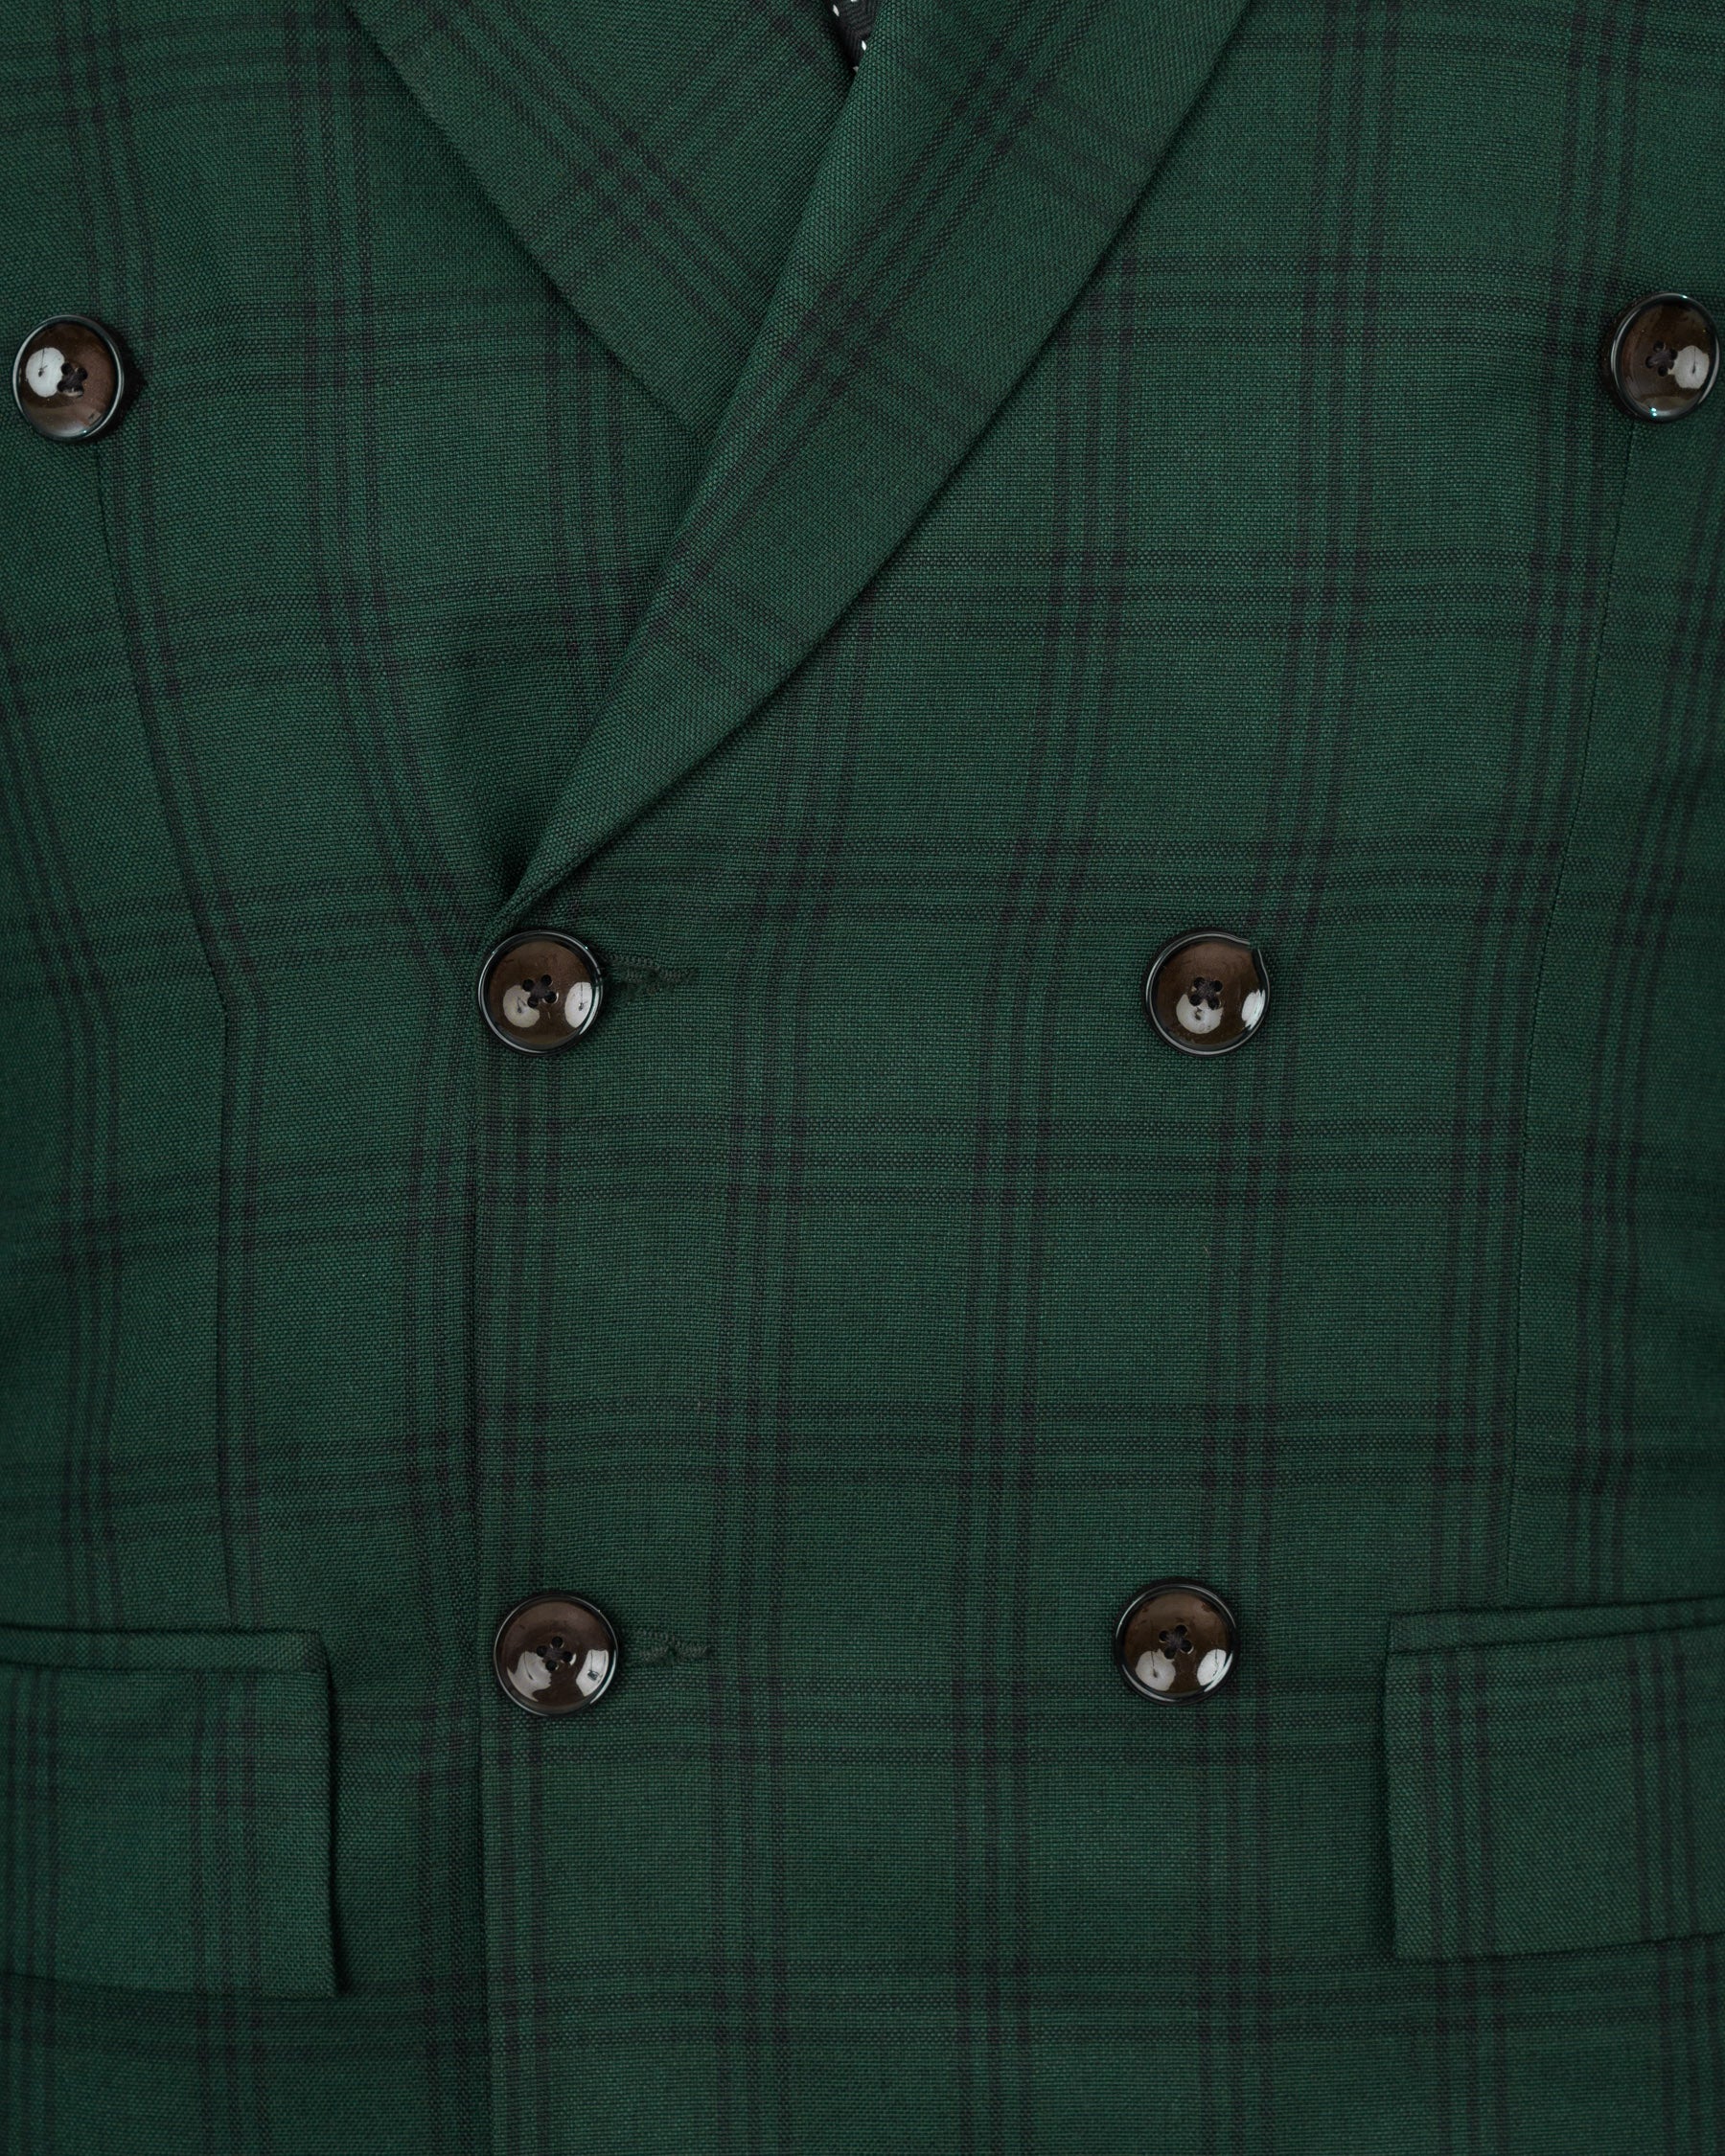 Phthalo Green Windowpane Double Breasted Blazer BL1722-DB-36,BL1722-DB-38,BL1722-DB-40,BL1722-DB-42,BL1722-DB-44,BL1722-DB-46,BL1722-DB-48,BL1722-DB-50,BL1722-DB-52,BL1722-DB-54,BL1722-DB-56,BL1722-DB-58,BL1722-DB-60